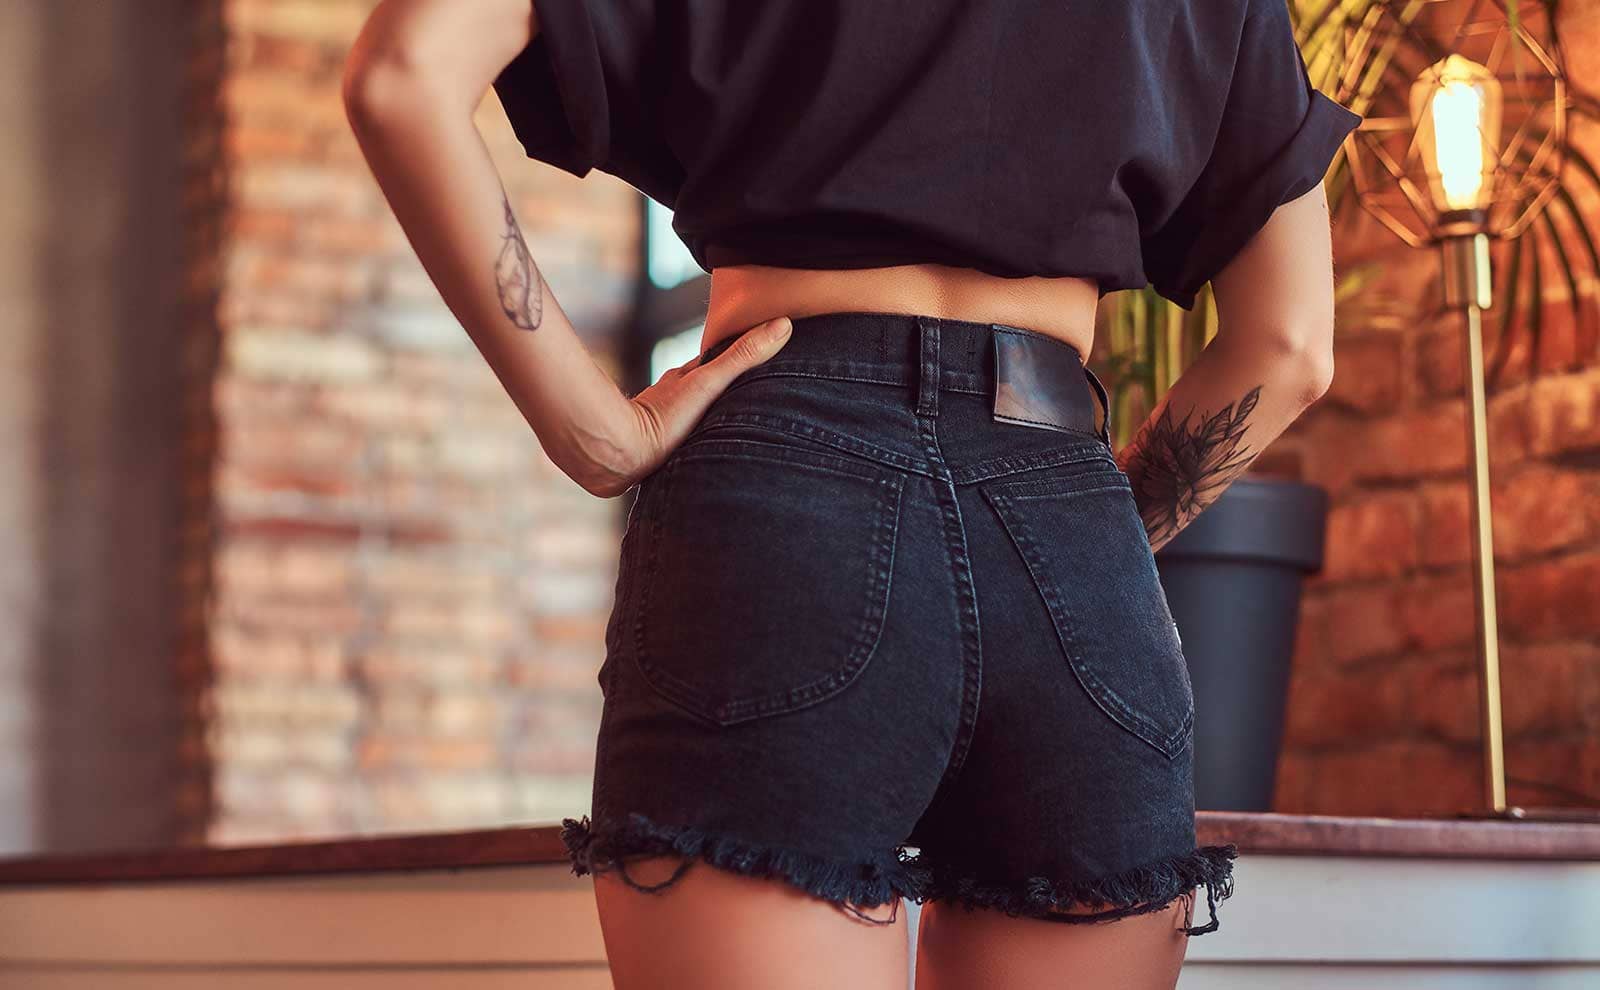 Cutoff Jeans: How To Cut Jeans Into Shorts - Step By Step